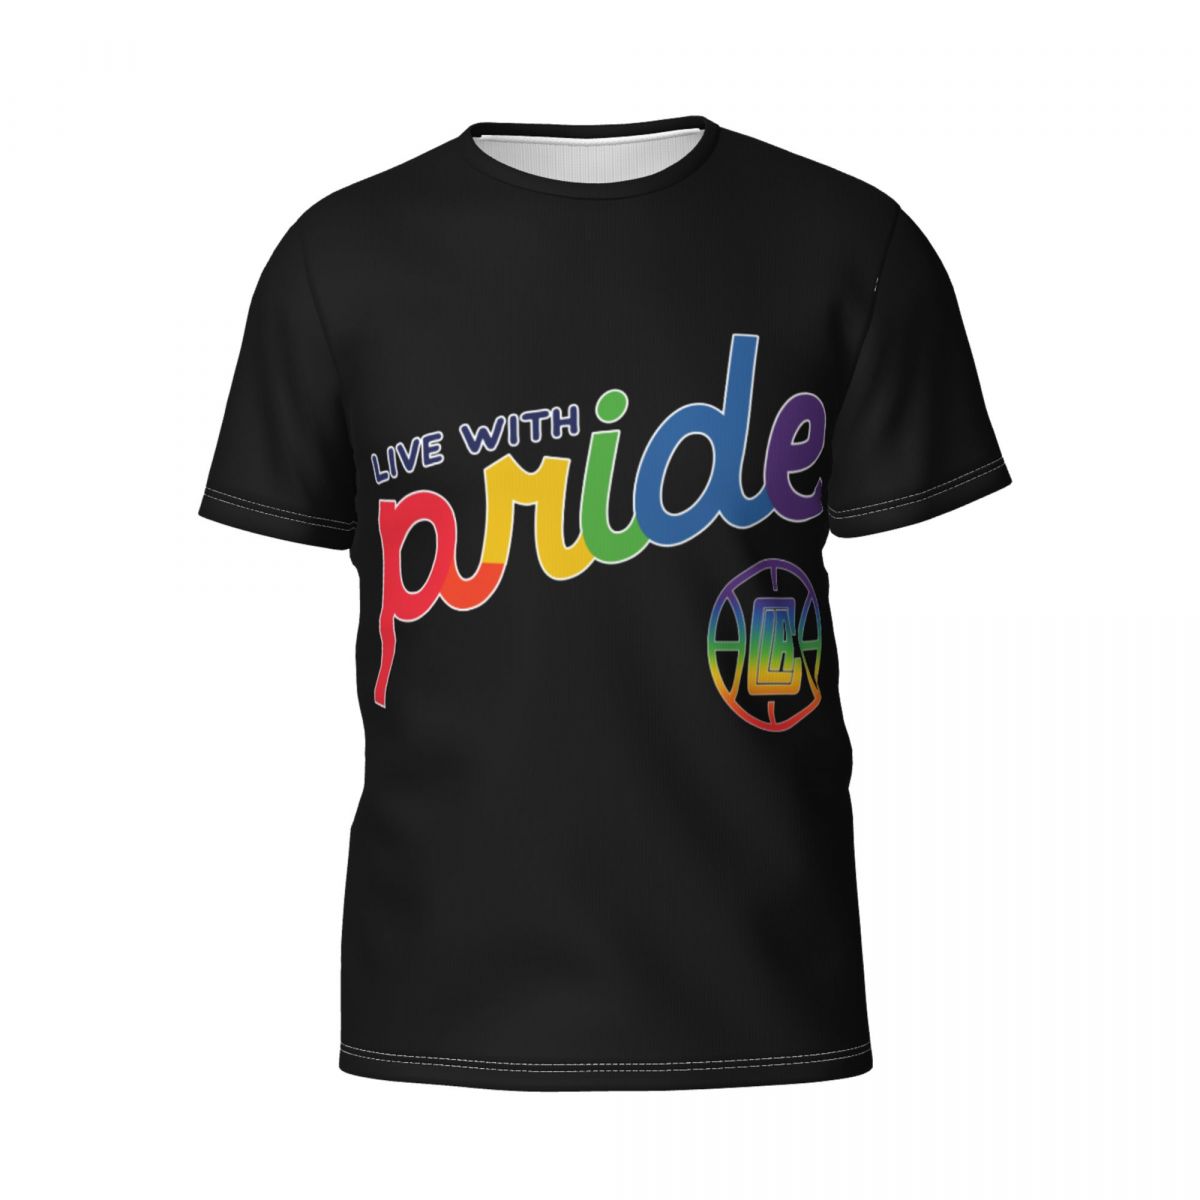 Los Angeles Clippers Live With Pride Short-Sleeve Men's T-Shirt